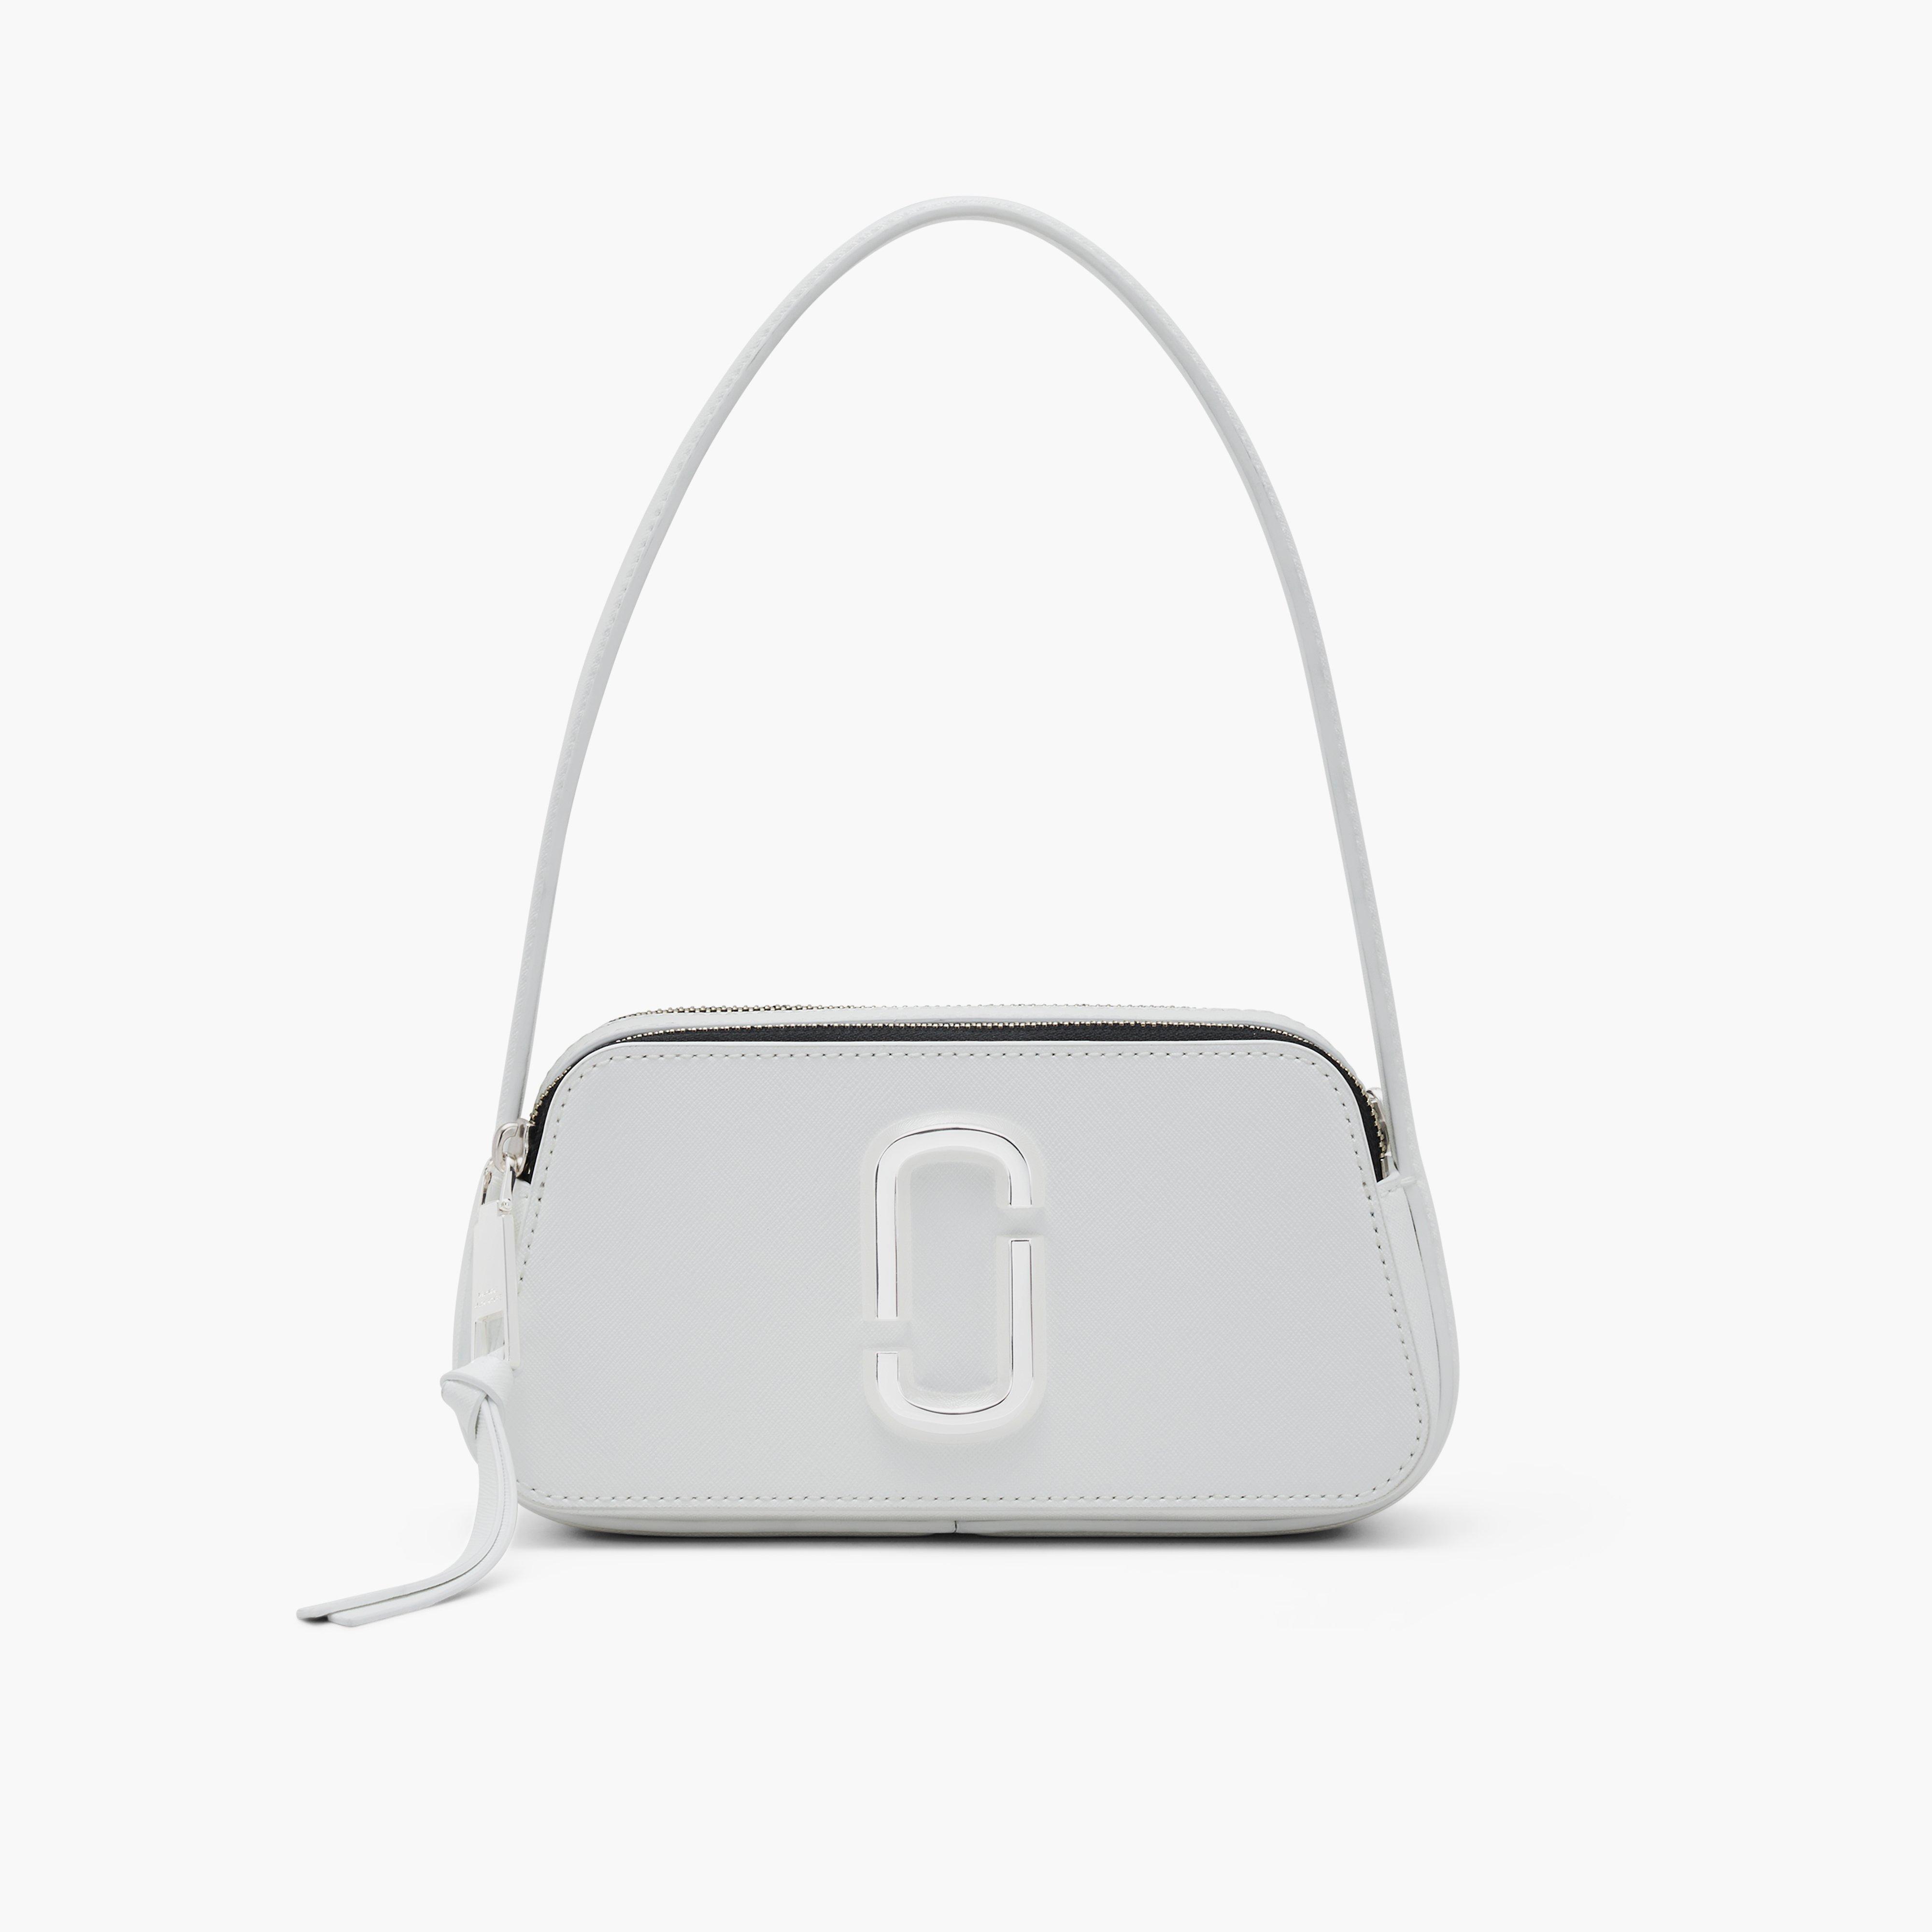 Marc by Marc jacobs The Slingshot,WHITE